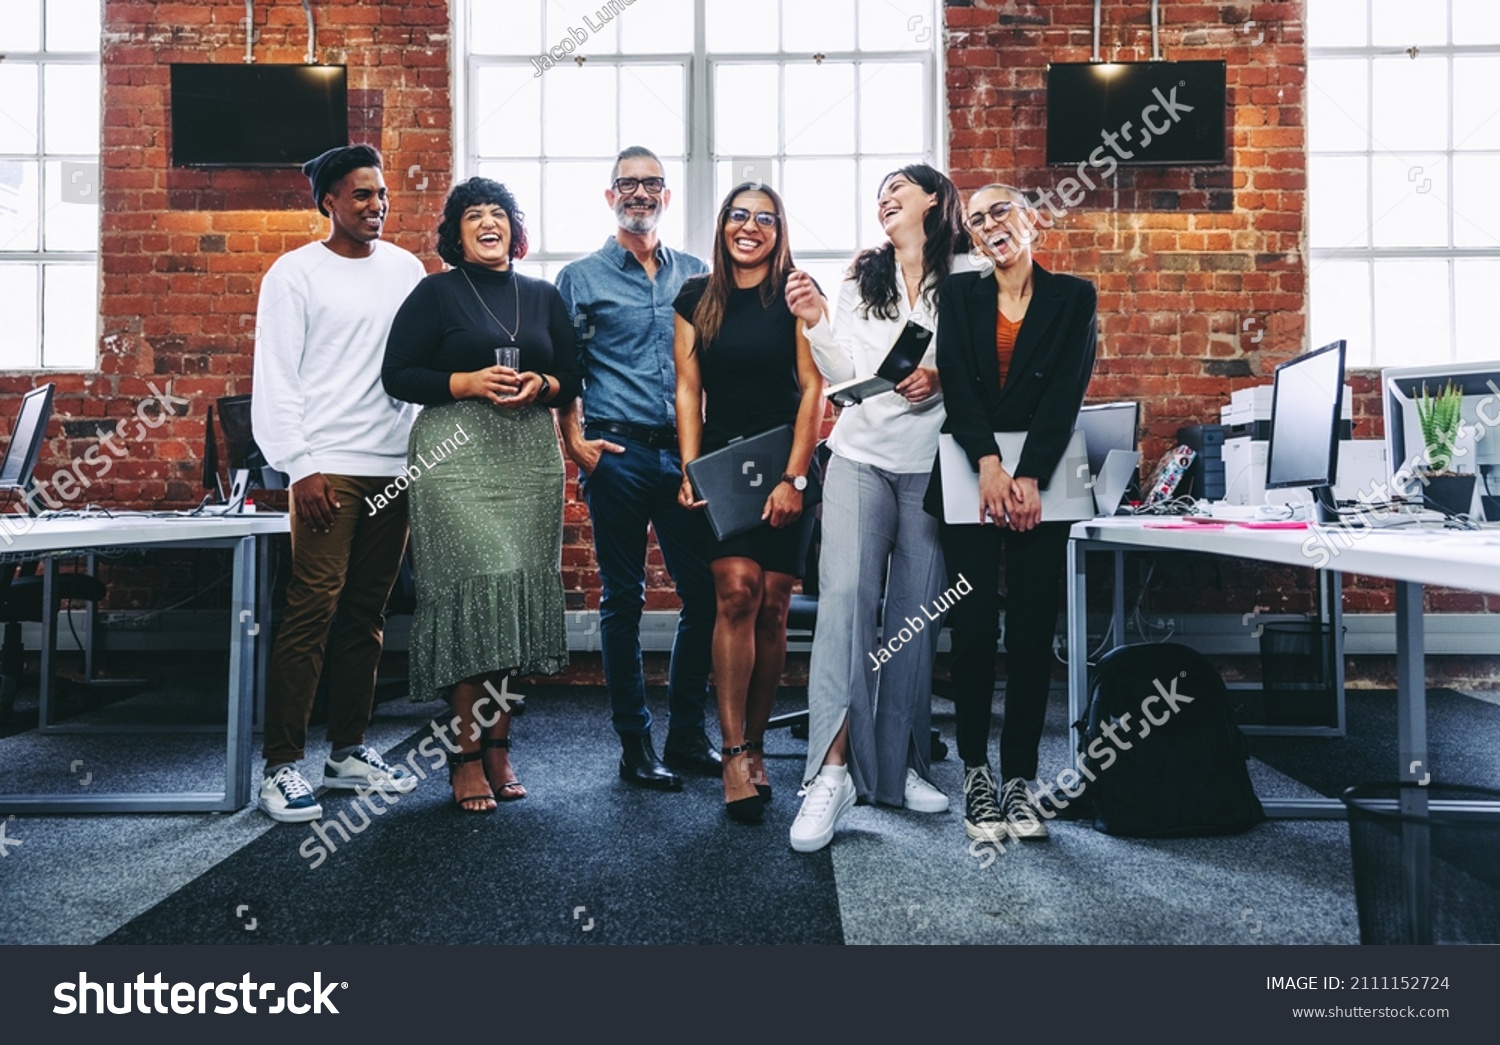 Group of businesspeople laughing cheerfully in a modern workplace. Diverse group of colleagues enjoying working together in an office. Successful businesspeople standing together. #2111152724